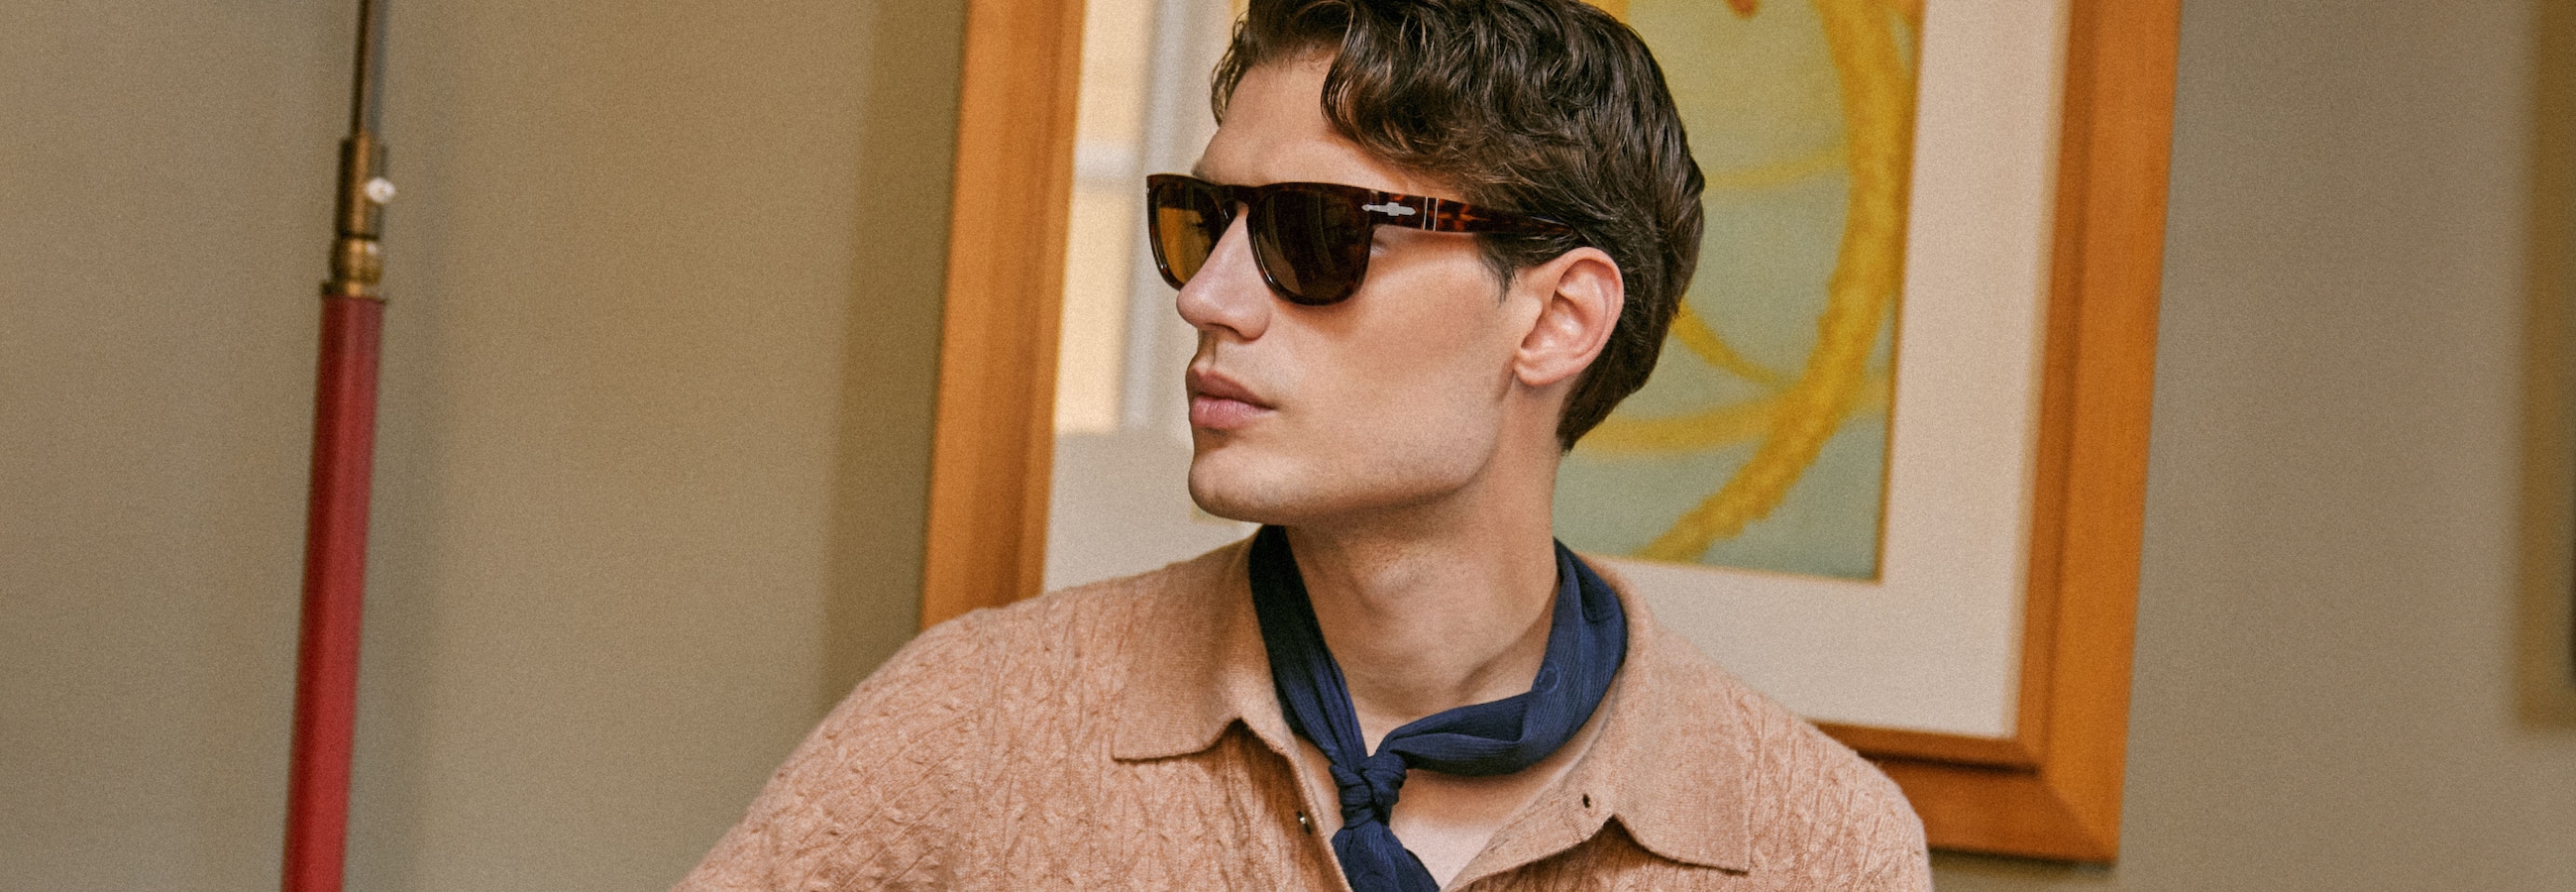 Persol® Eyewear - Persol® Official Store Persol Poland